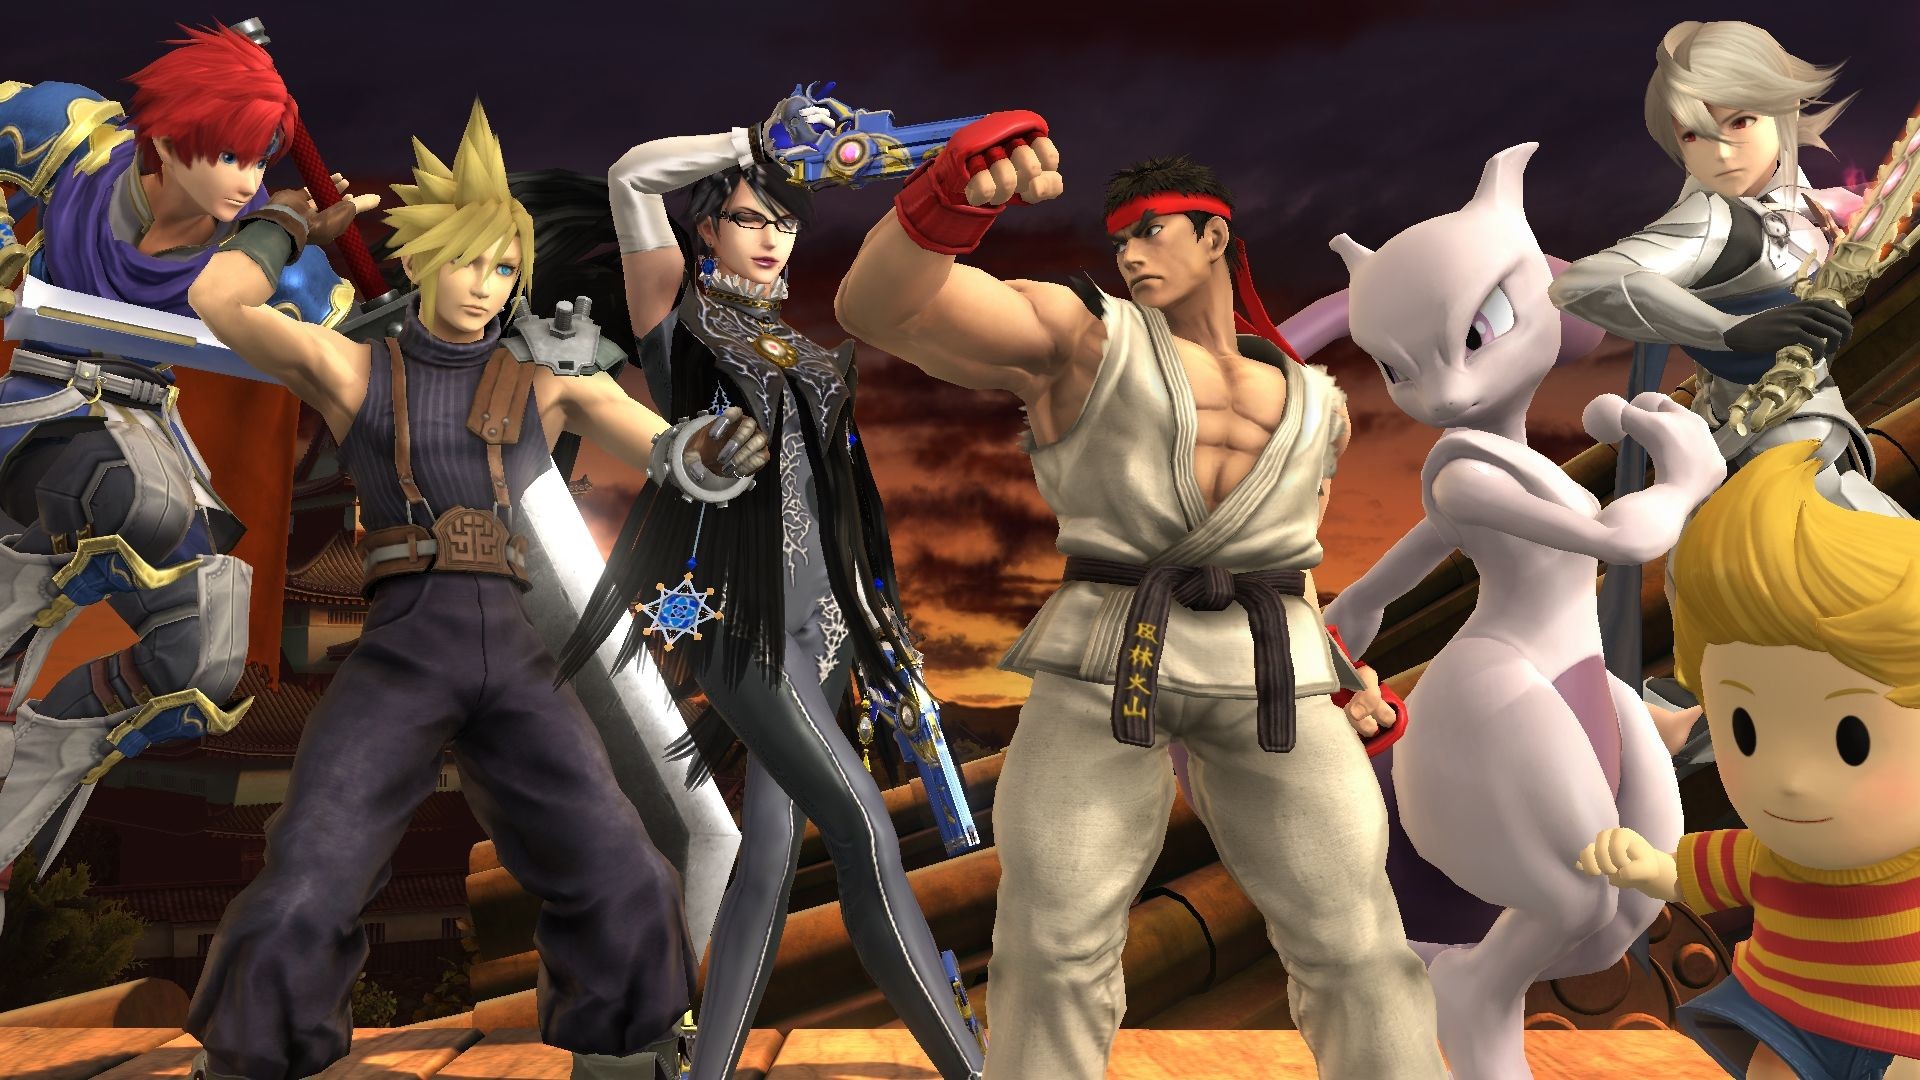 1920x1080 Are the DLC fighters in Super Smash Bros. worth it?